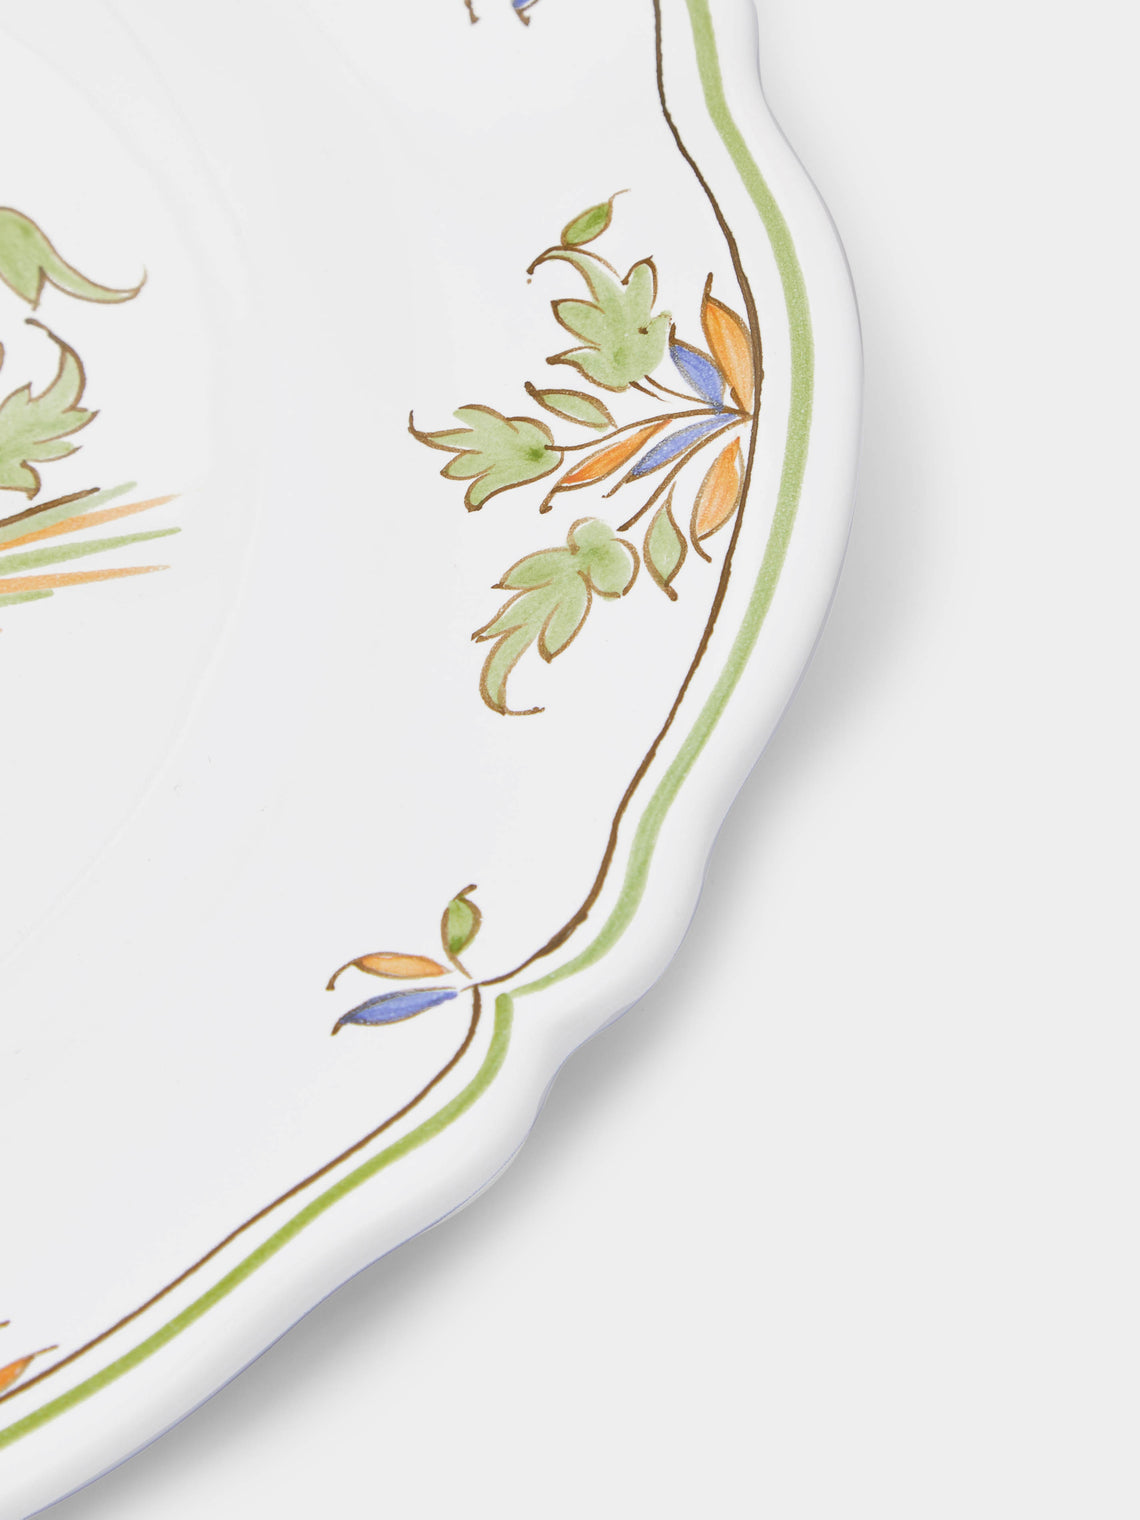 Bourg Joly Malicorne - Moustiers Hand-Painted Ceramic Dinner Plates (Set of 4) -  - ABASK